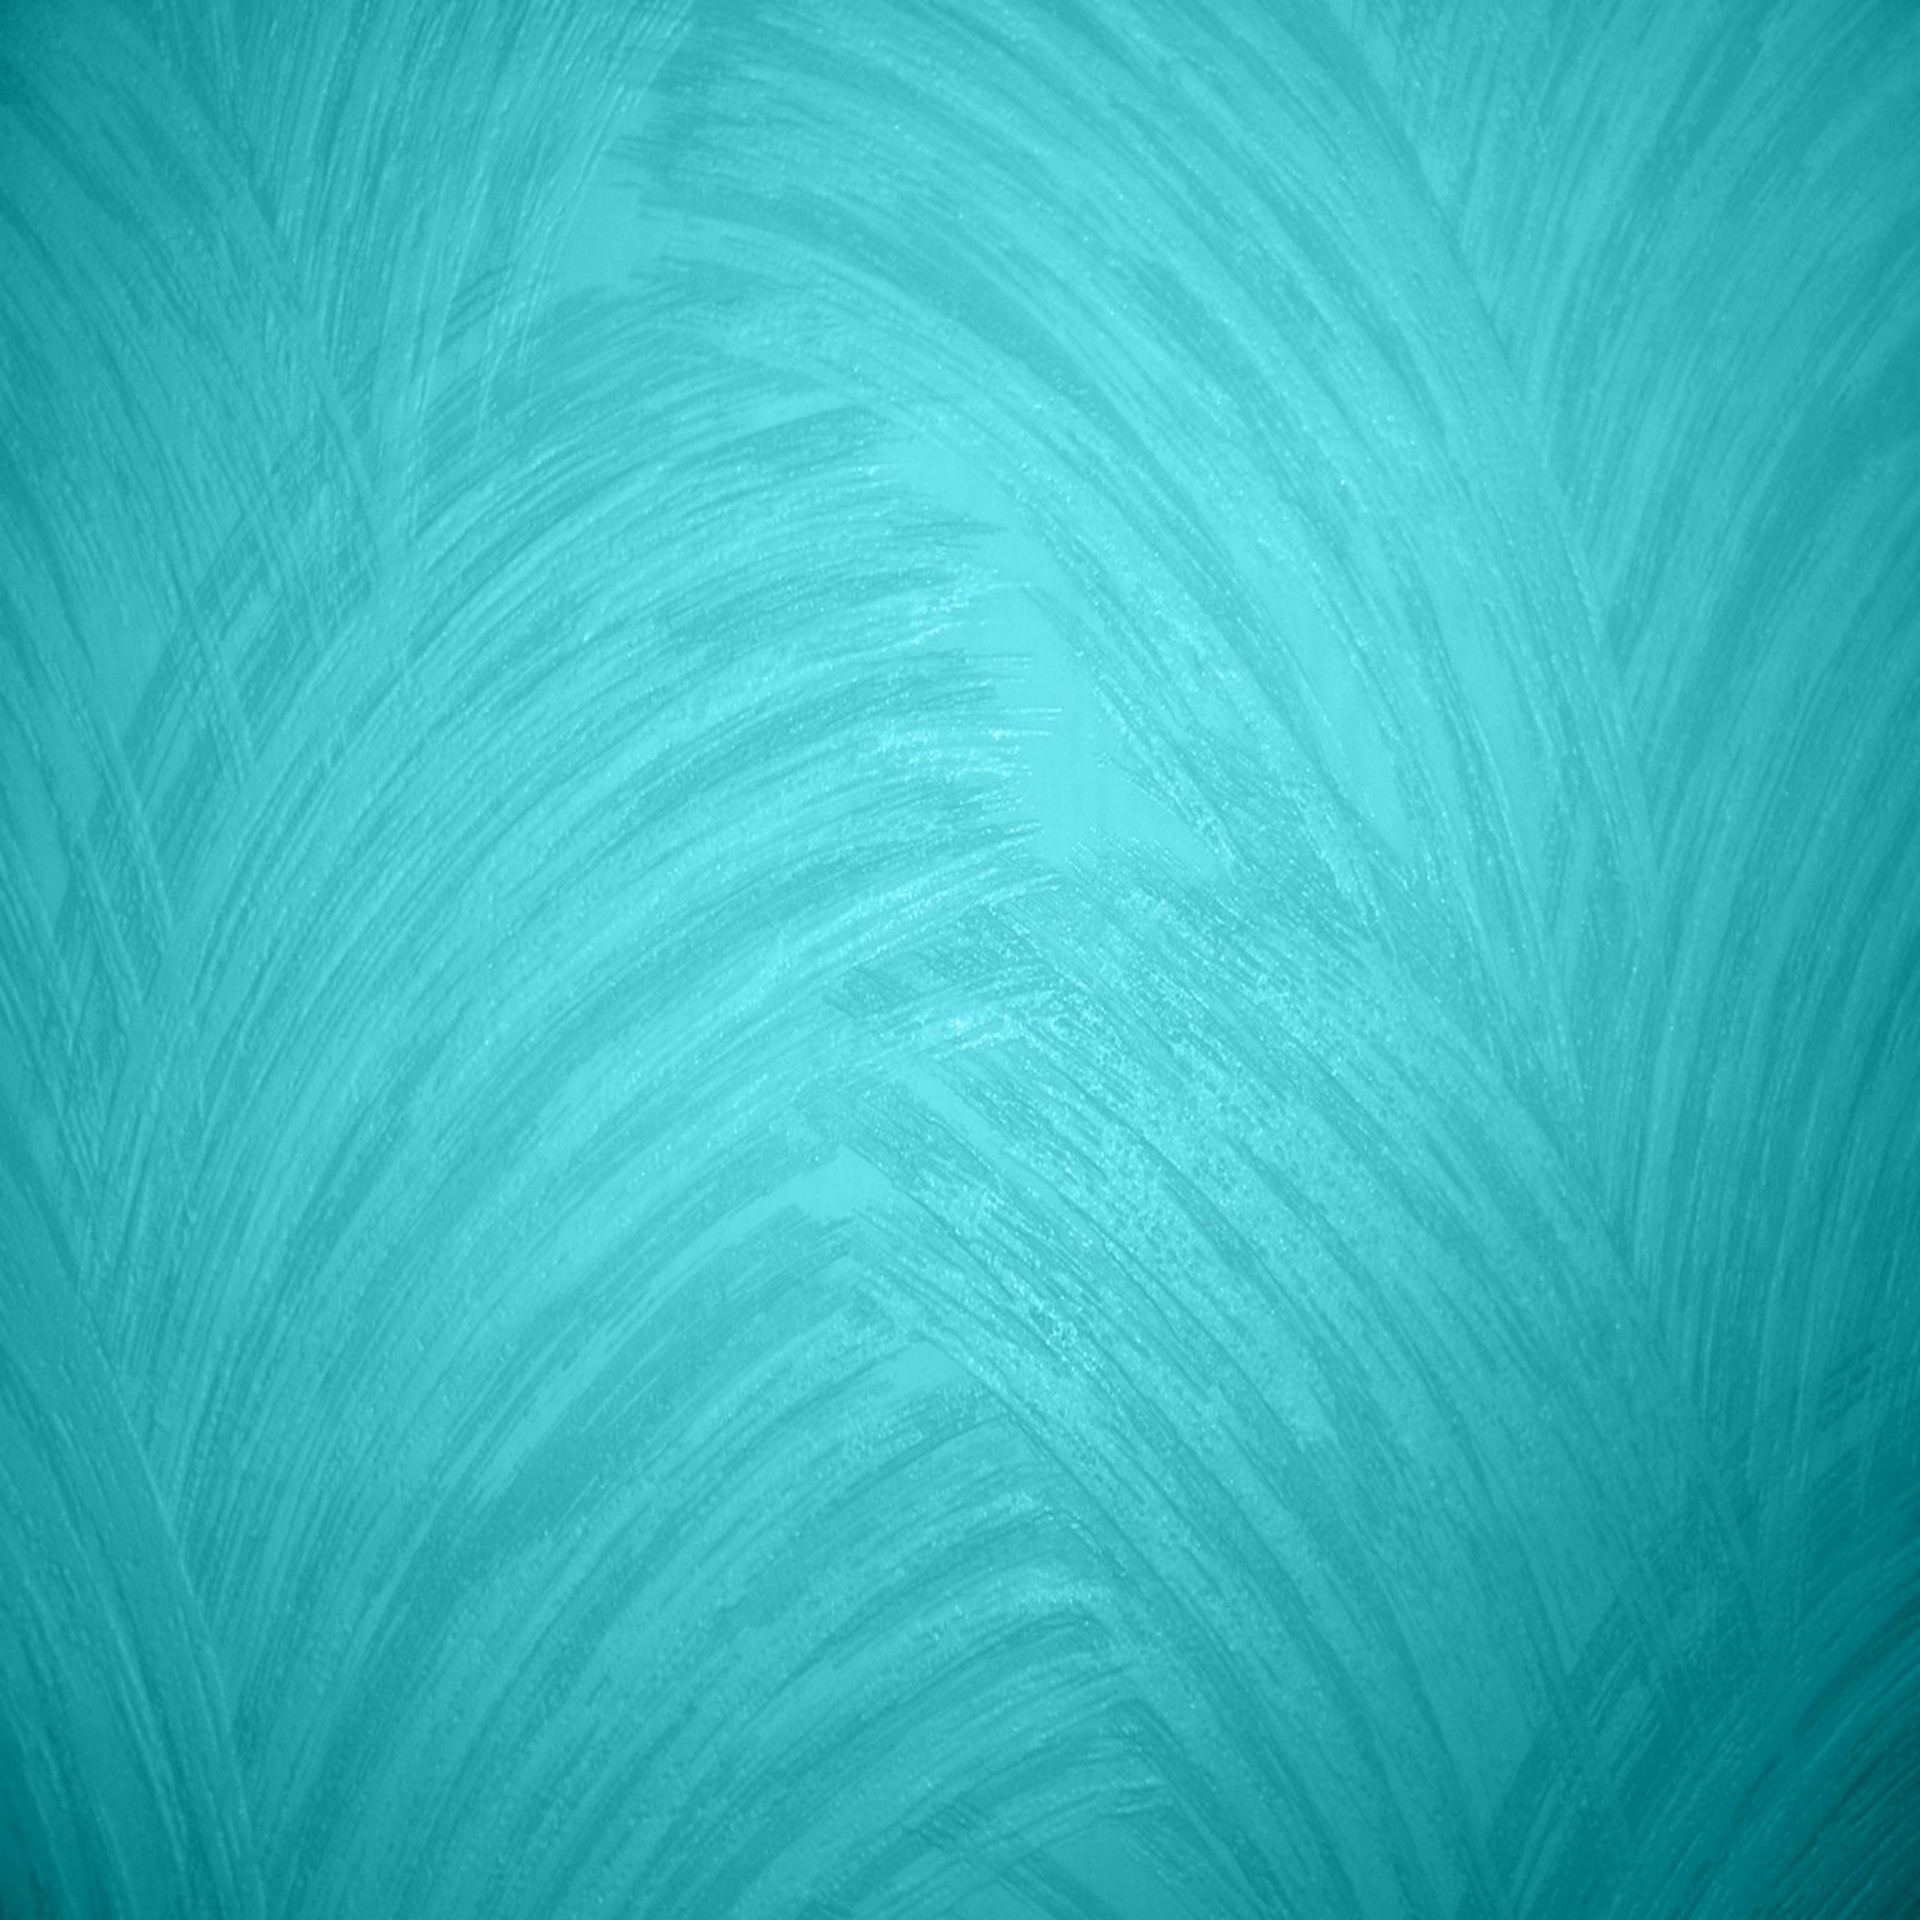 Blue Stylized Paper 10 Free Stock Photo Public Domain Pictures